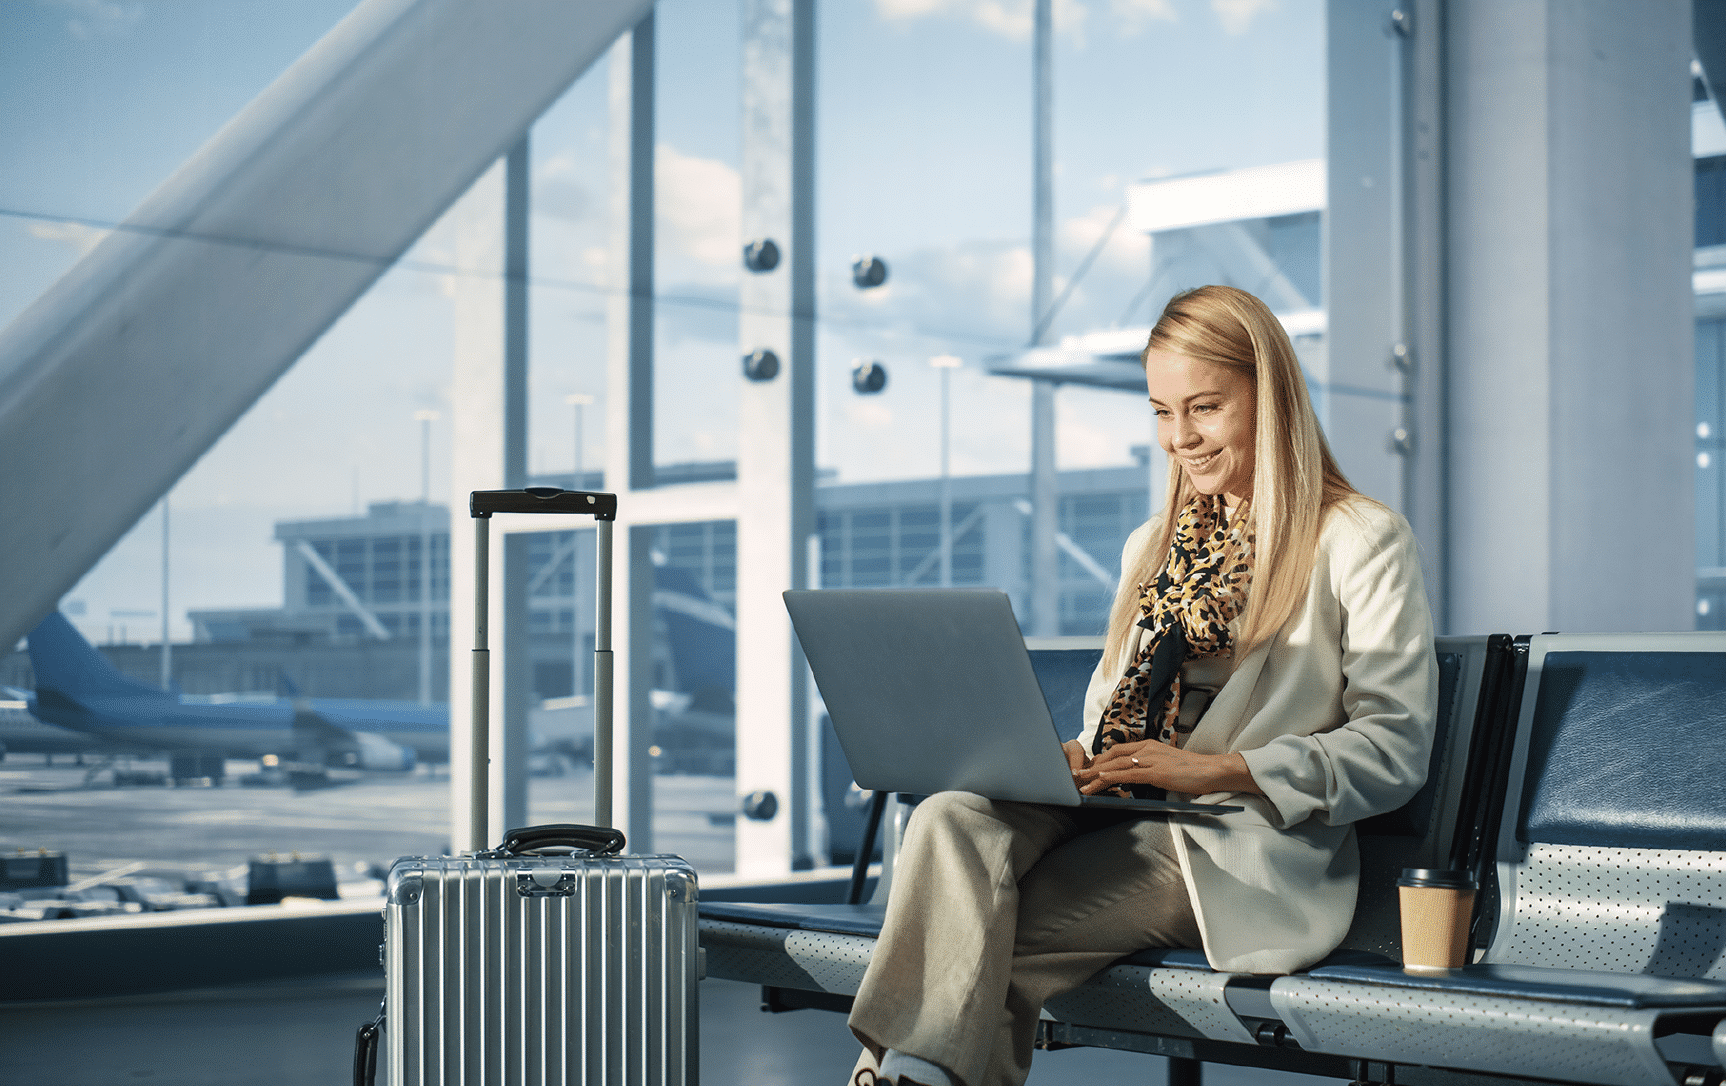 Woman at the airport lounge working on laptop and smiling